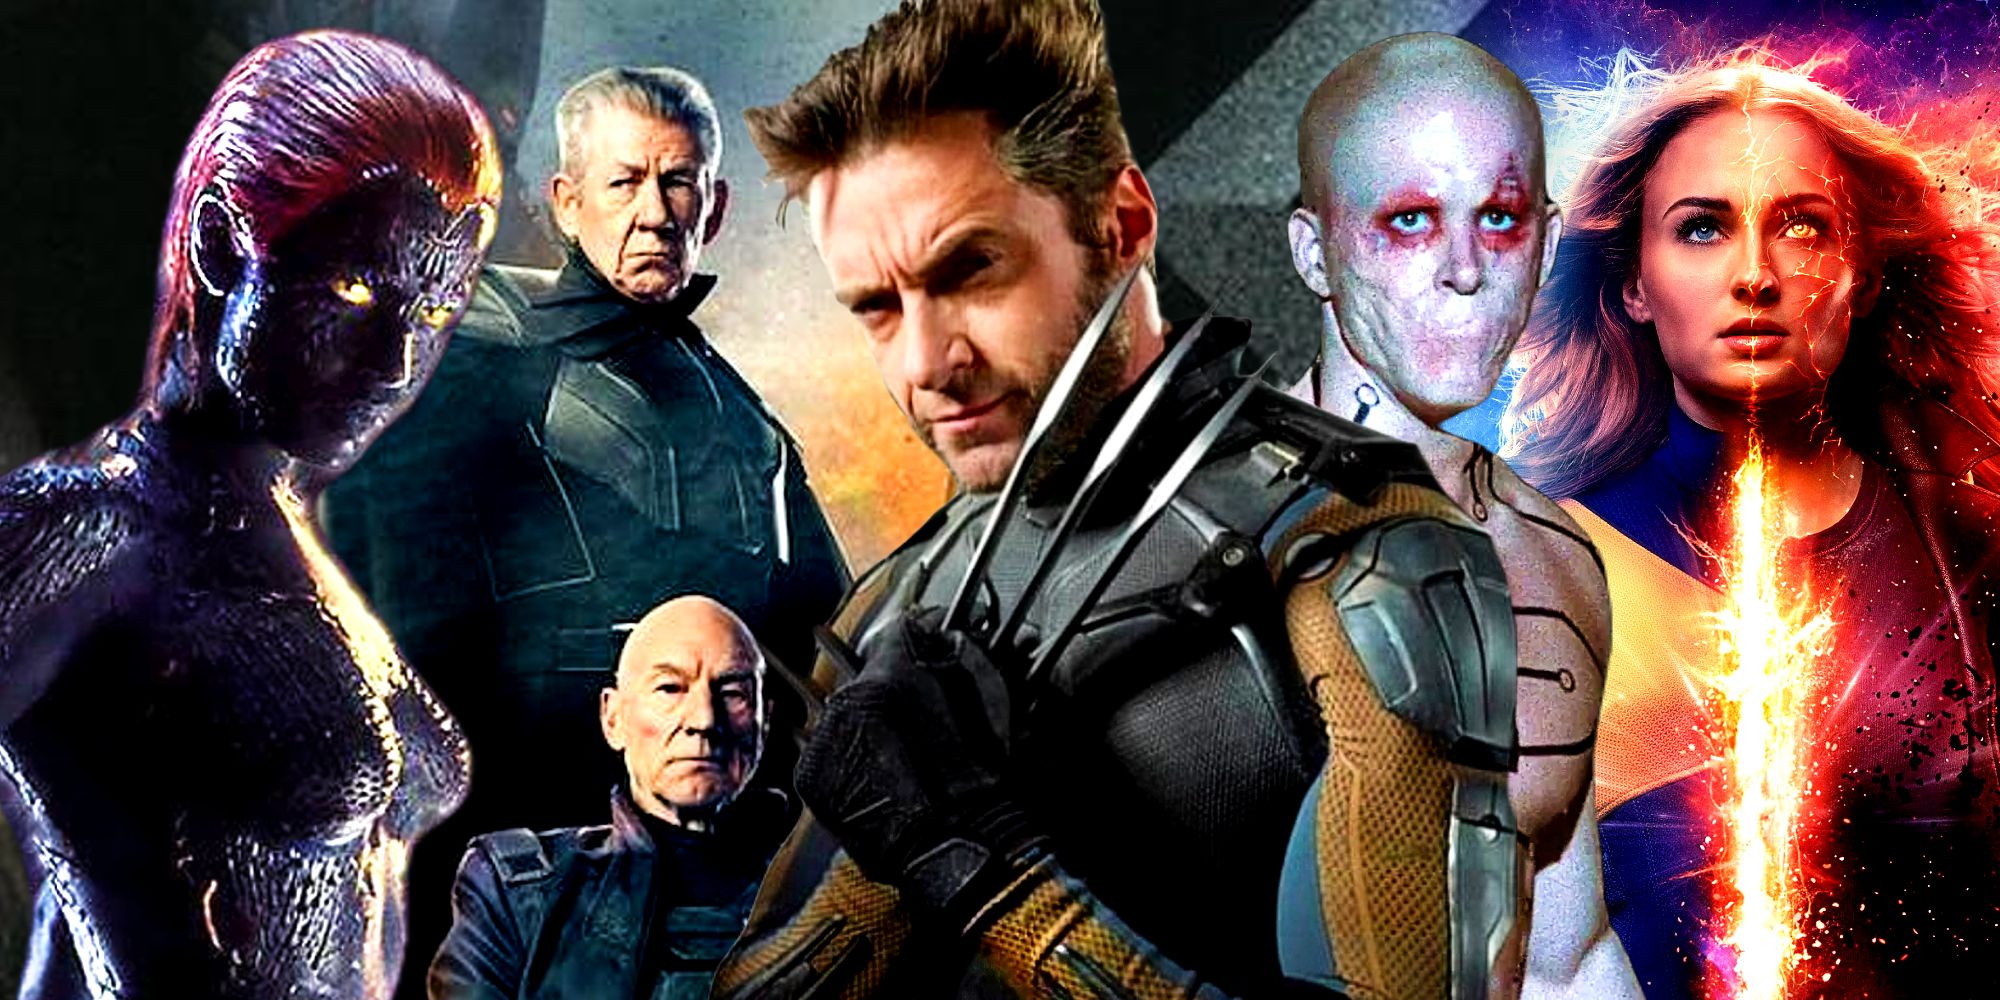 Hugh Jackman's Wolverine and Fox's X-Men Franchise Characters